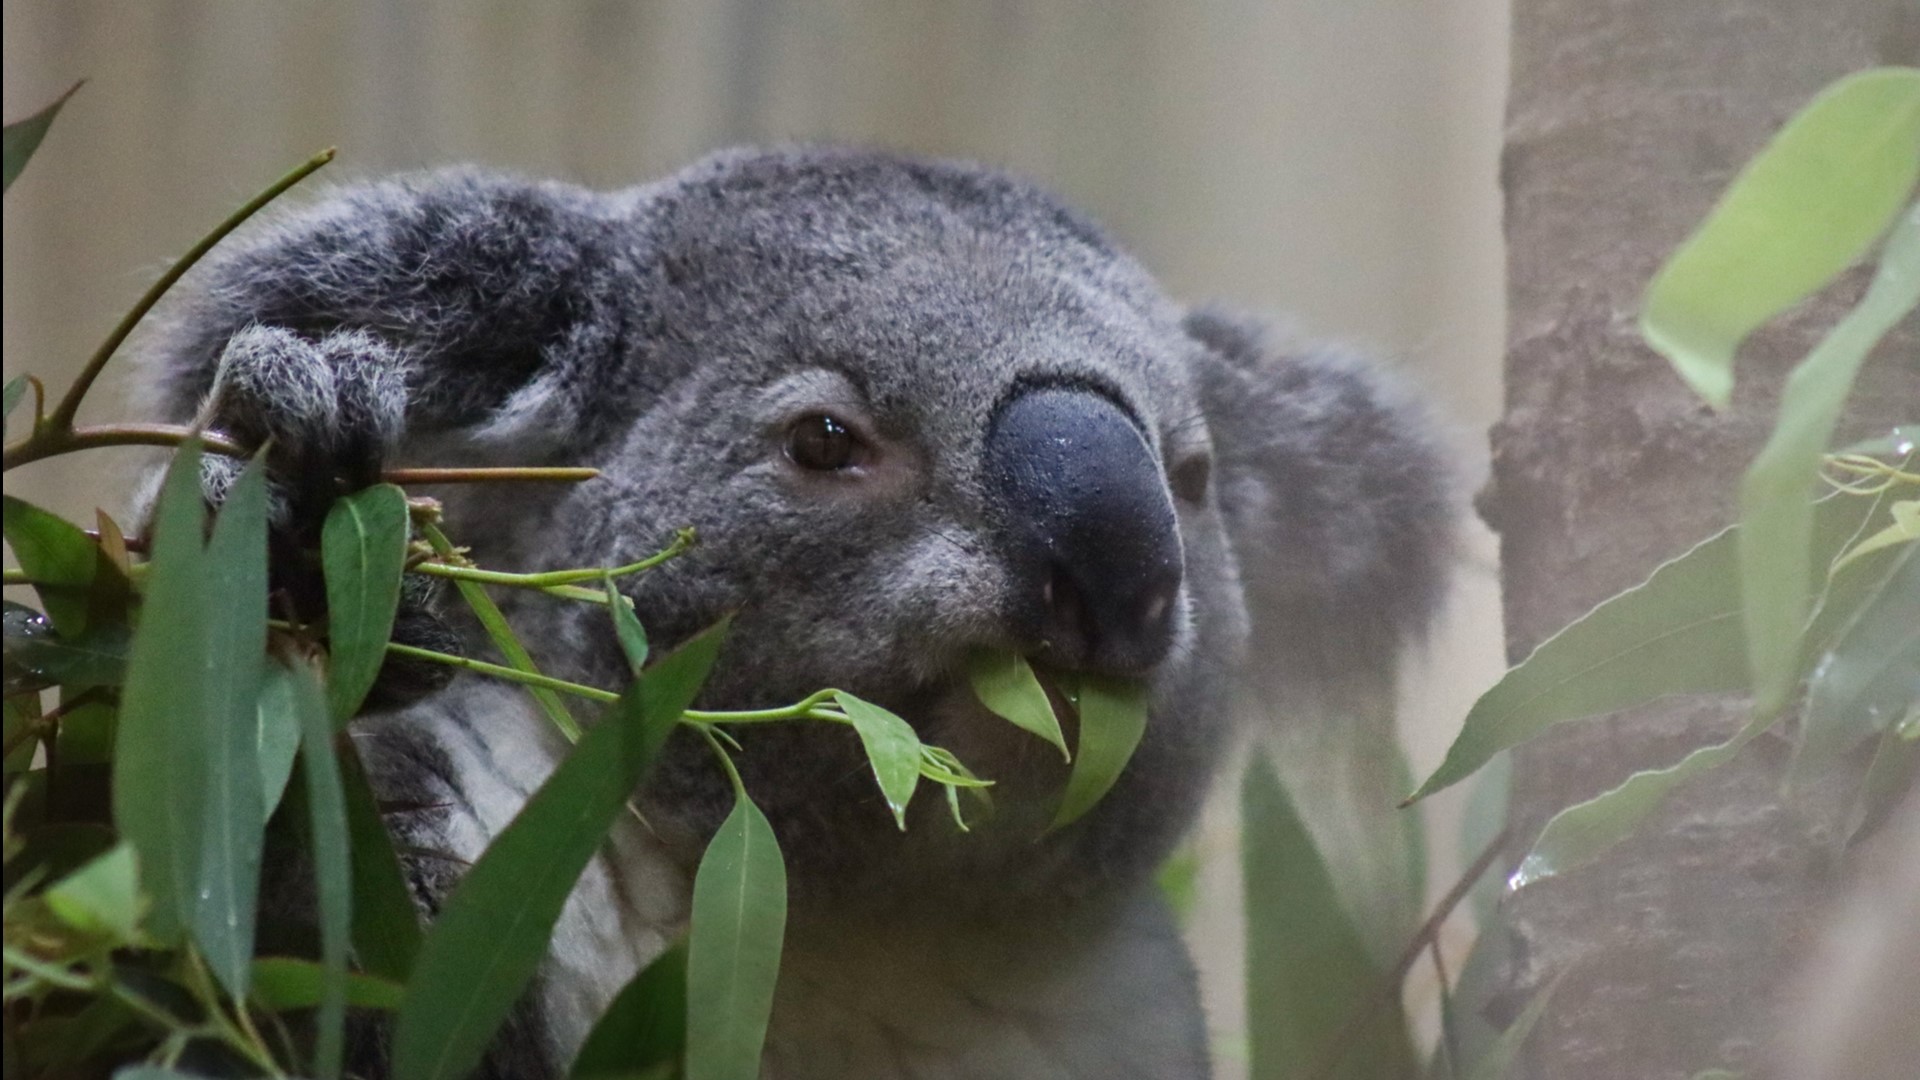 The three-day festival is a chance to celebrate and say goodbye to the two male koalas, who visited the zoo from San Diego this summer.